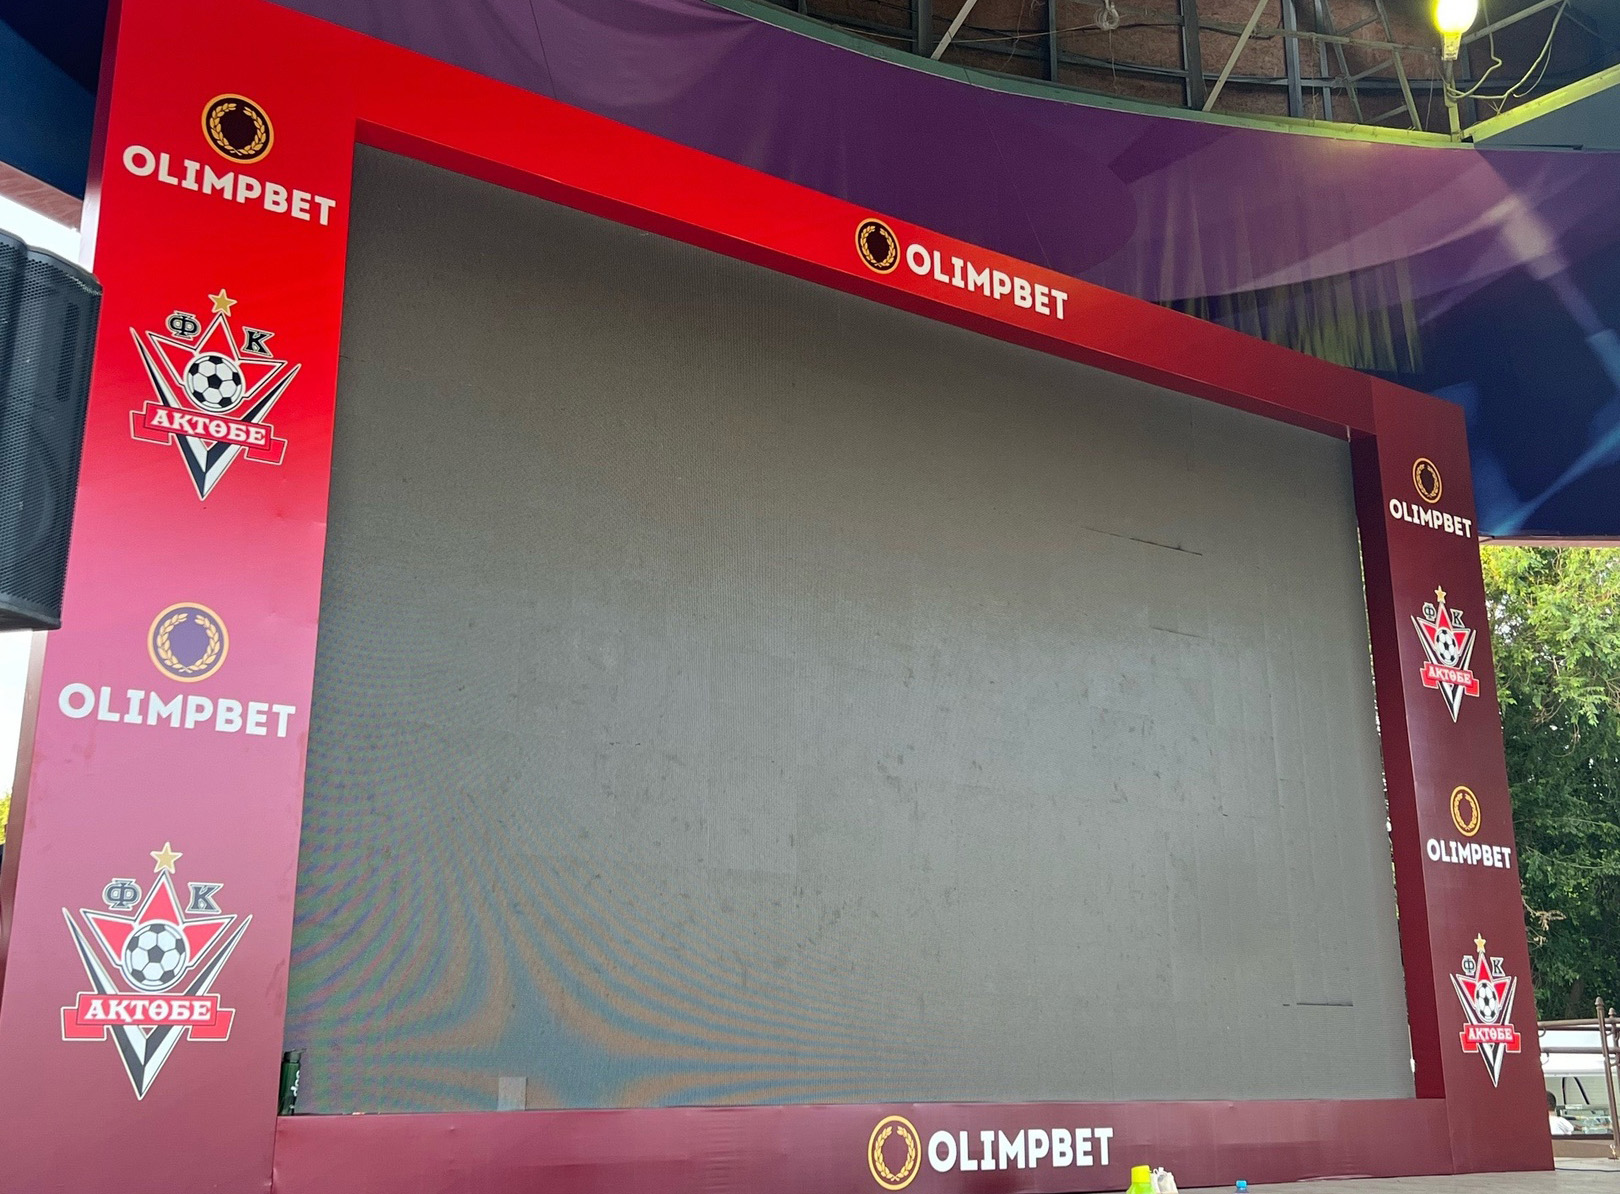 Match between Aktobe – Maqtaaral is on the big screen in Central Park